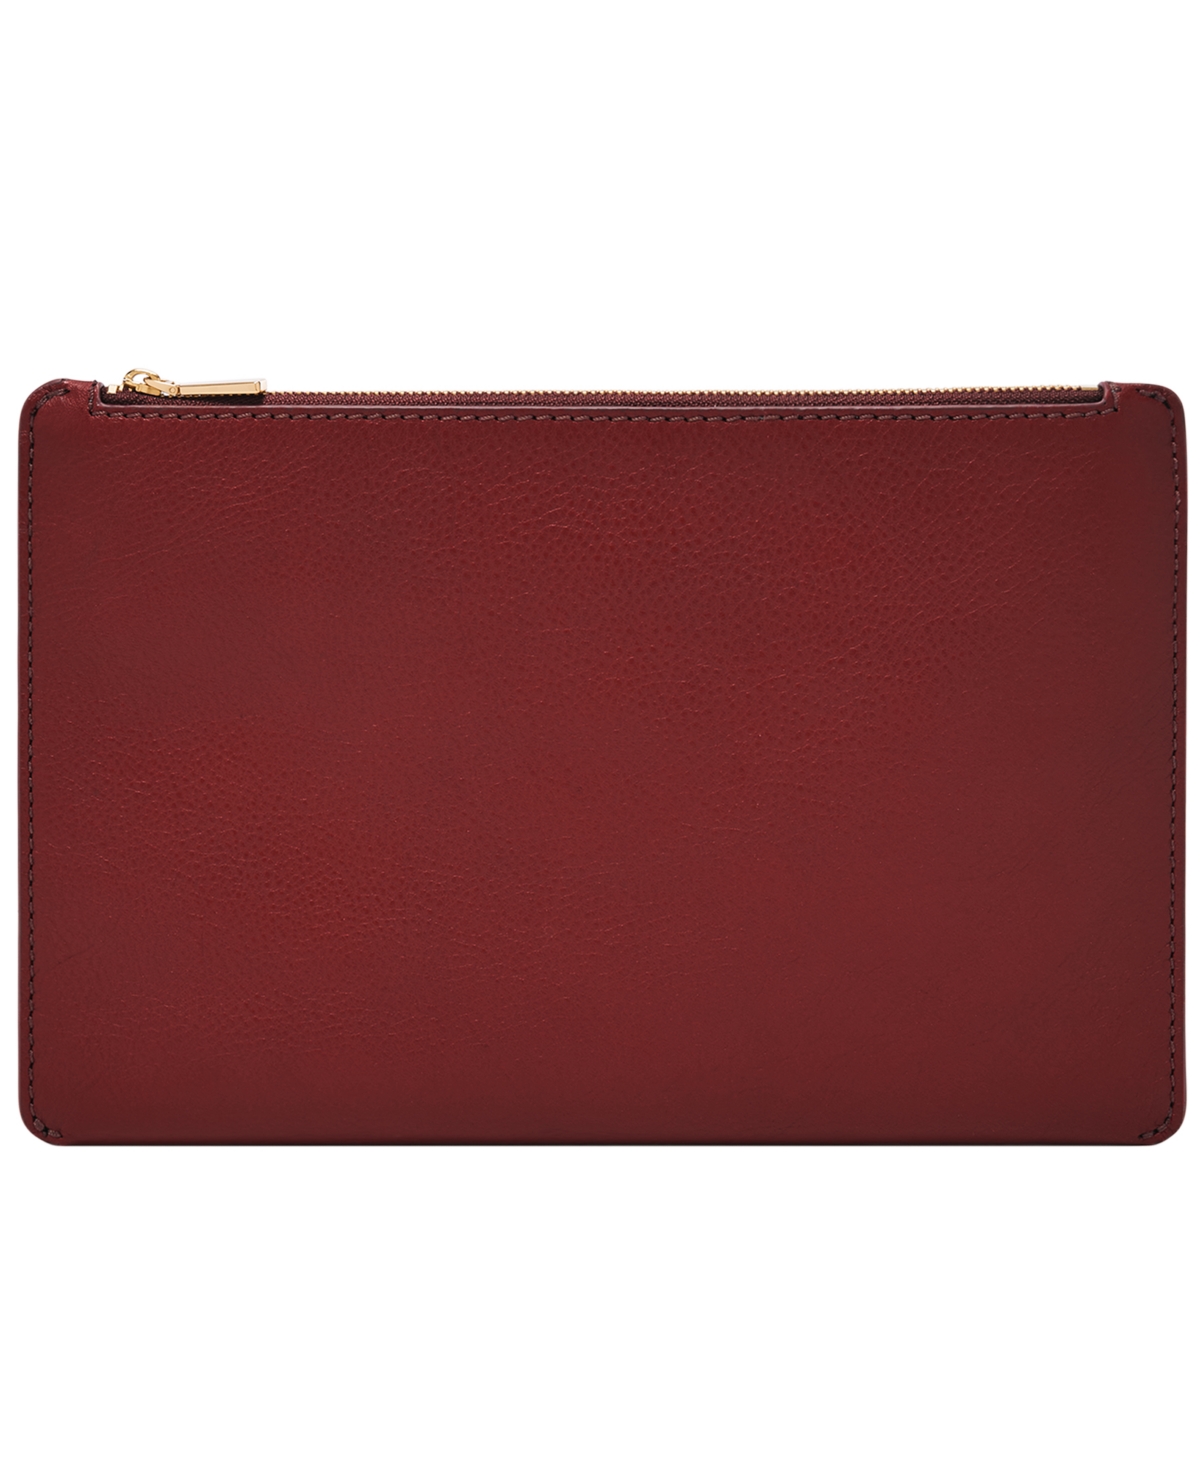 Fossil Pouch In Scarlet